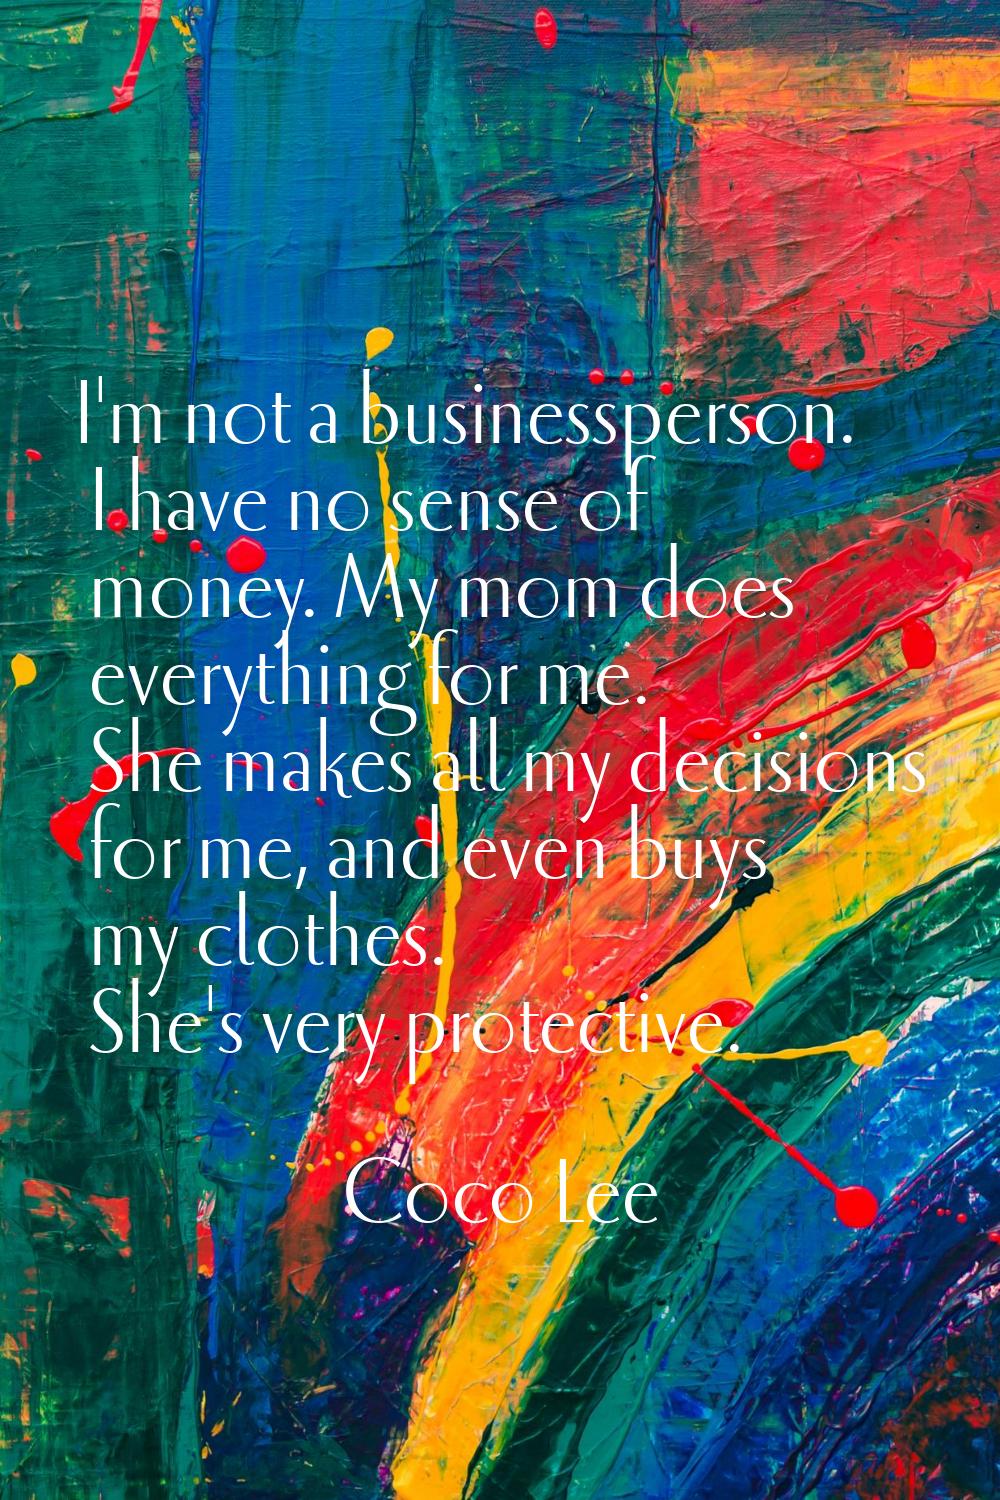 I'm not a businessperson. I have no sense of money. My mom does everything for me. She makes all my